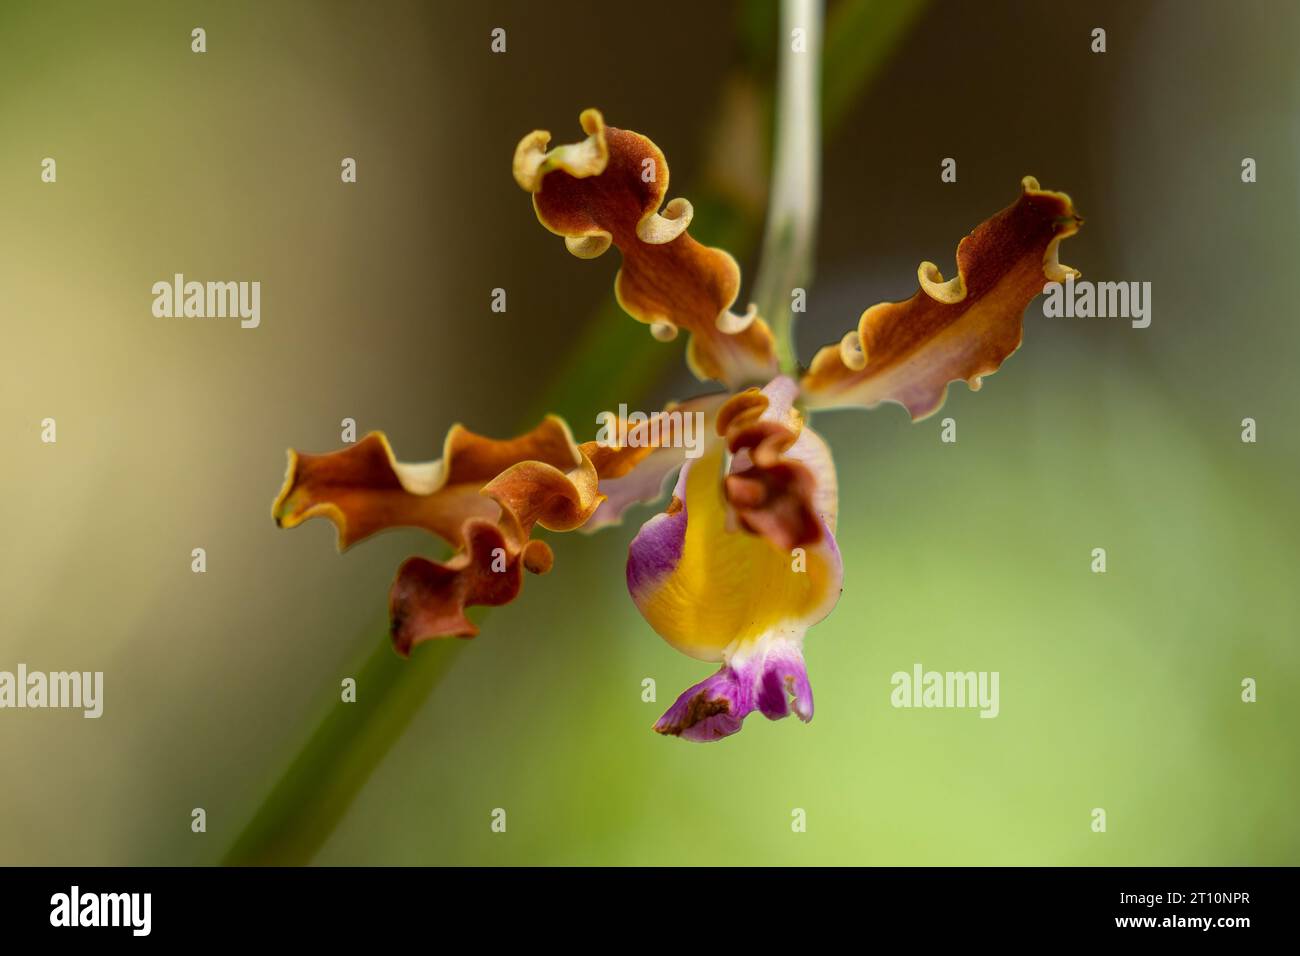 The Trumpet Player's Schomburgkia, Myrmecophila tibicinis, a small epiphytic orchid by the New River in Belize. Stock Photo